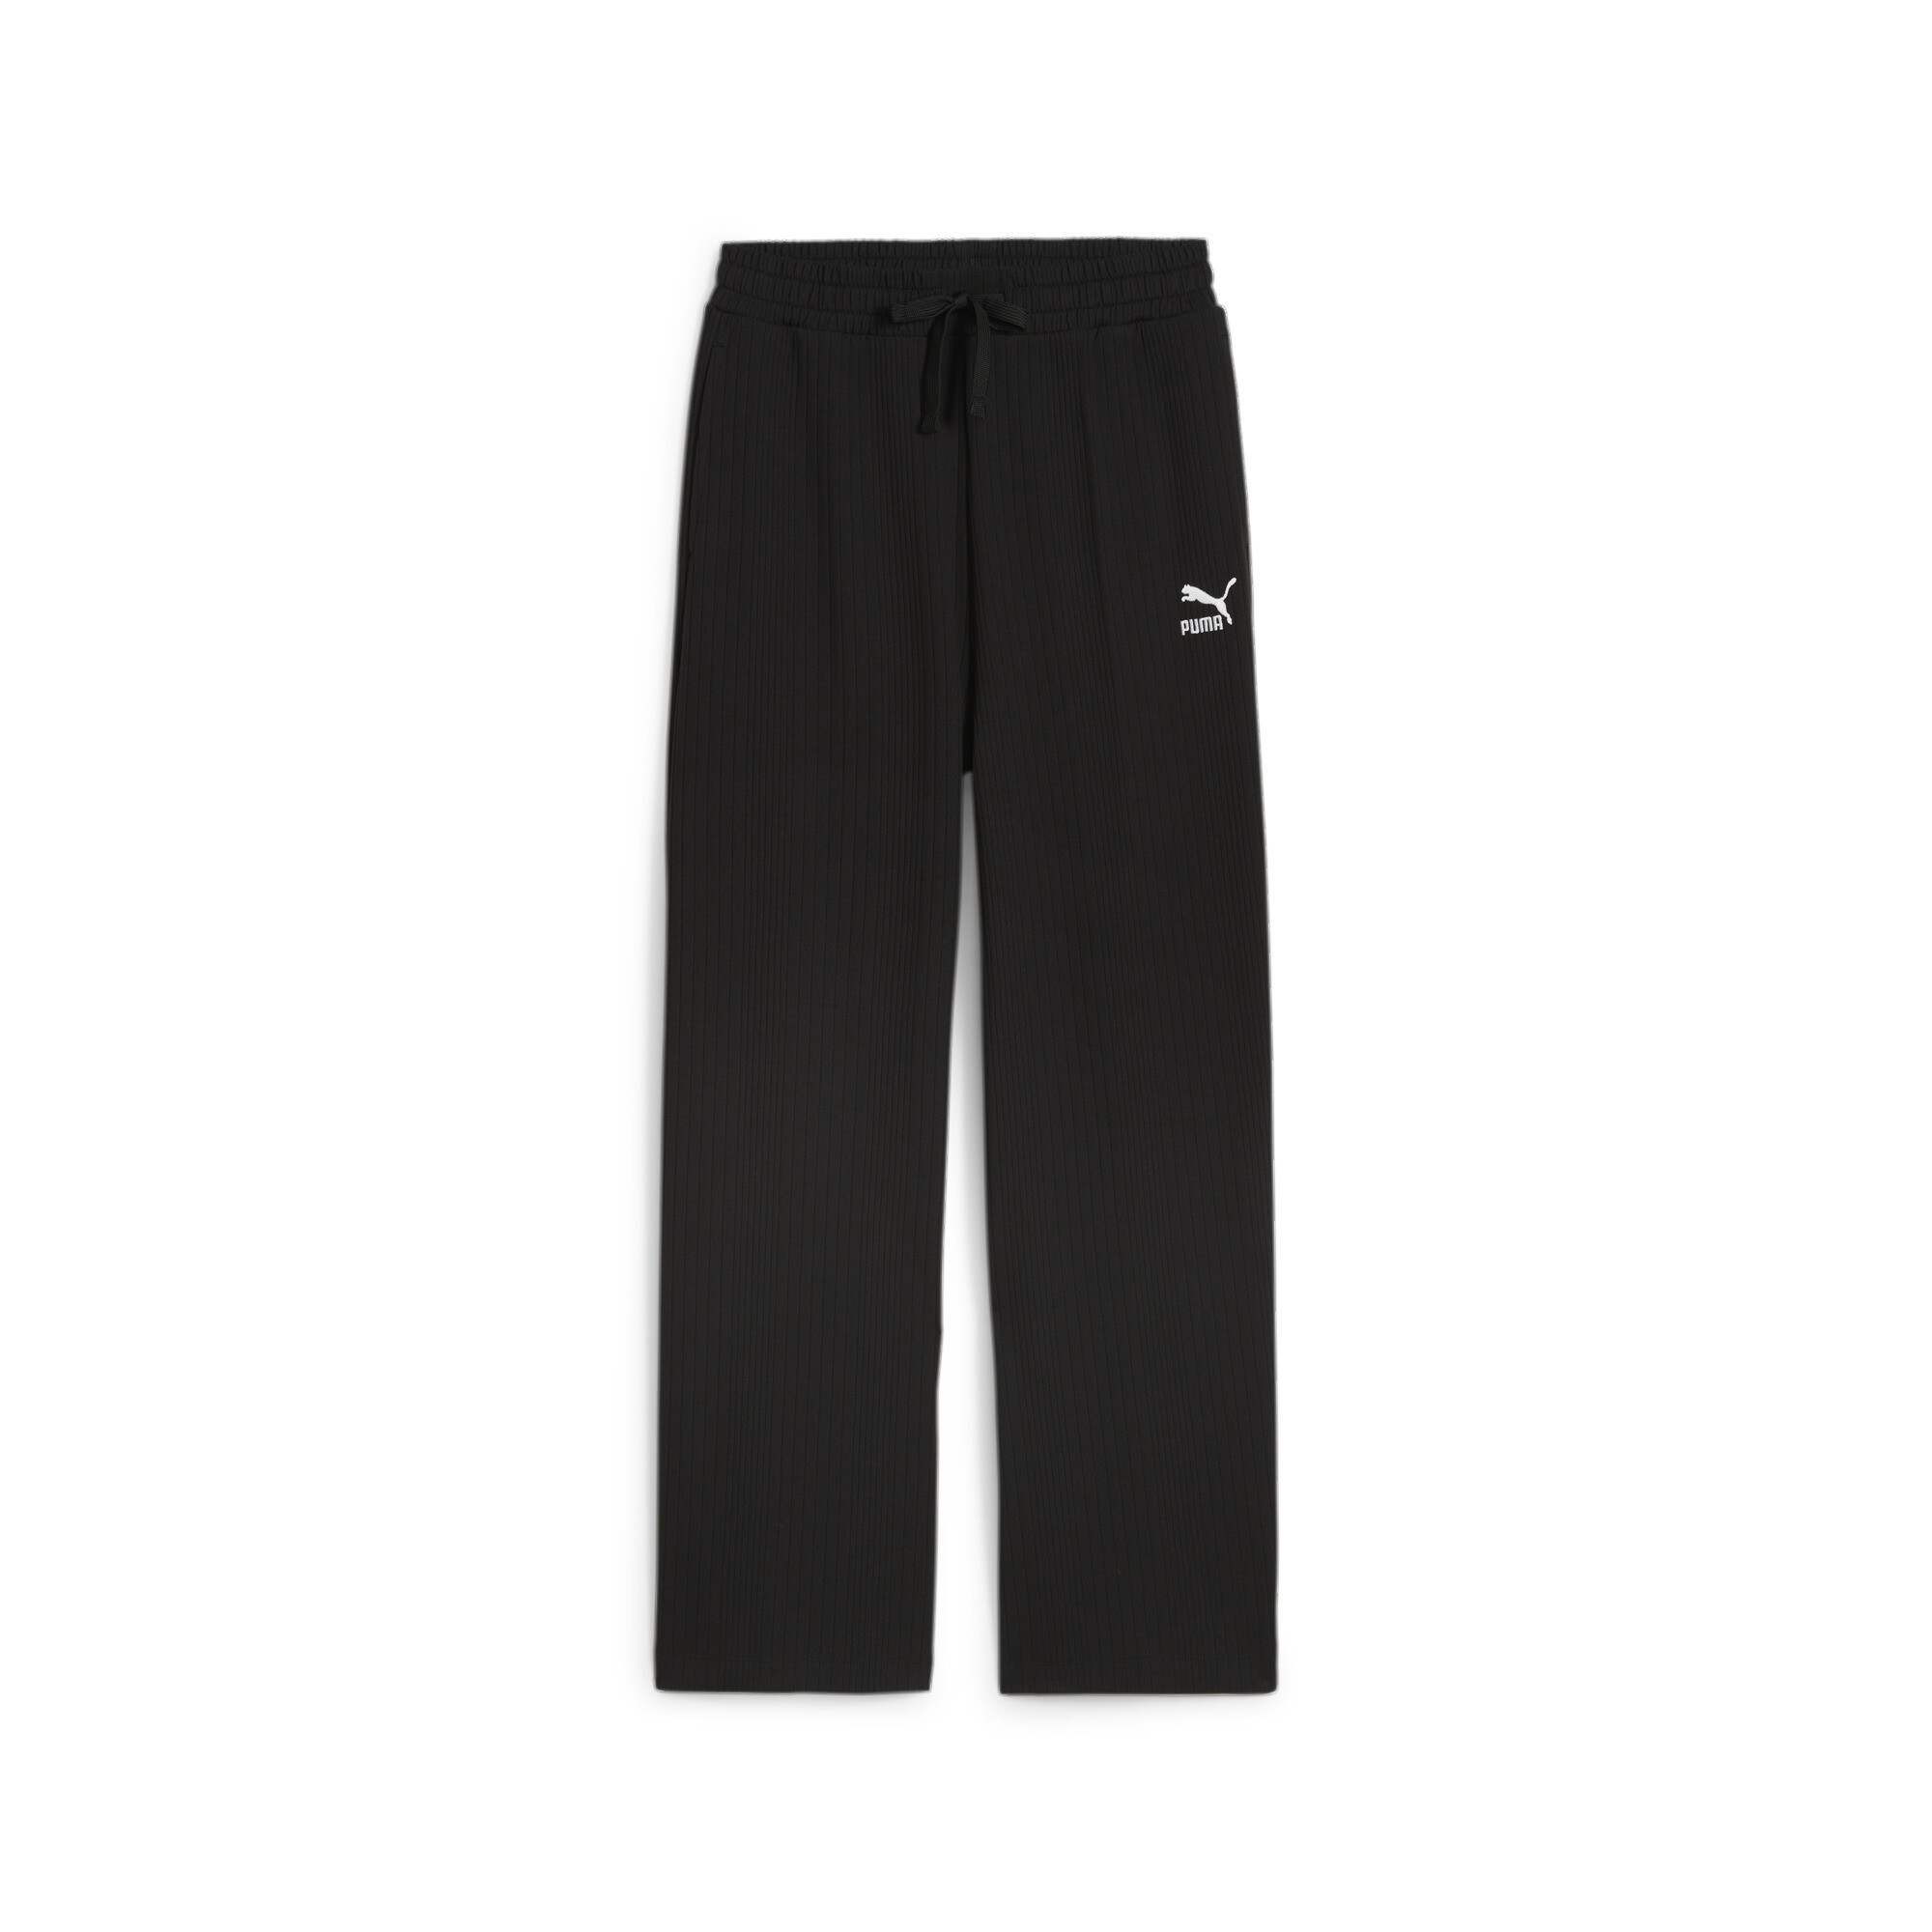 Women's PUMA CLASSICS Ribbed Relaxed Sweatpant In Black, Size XS